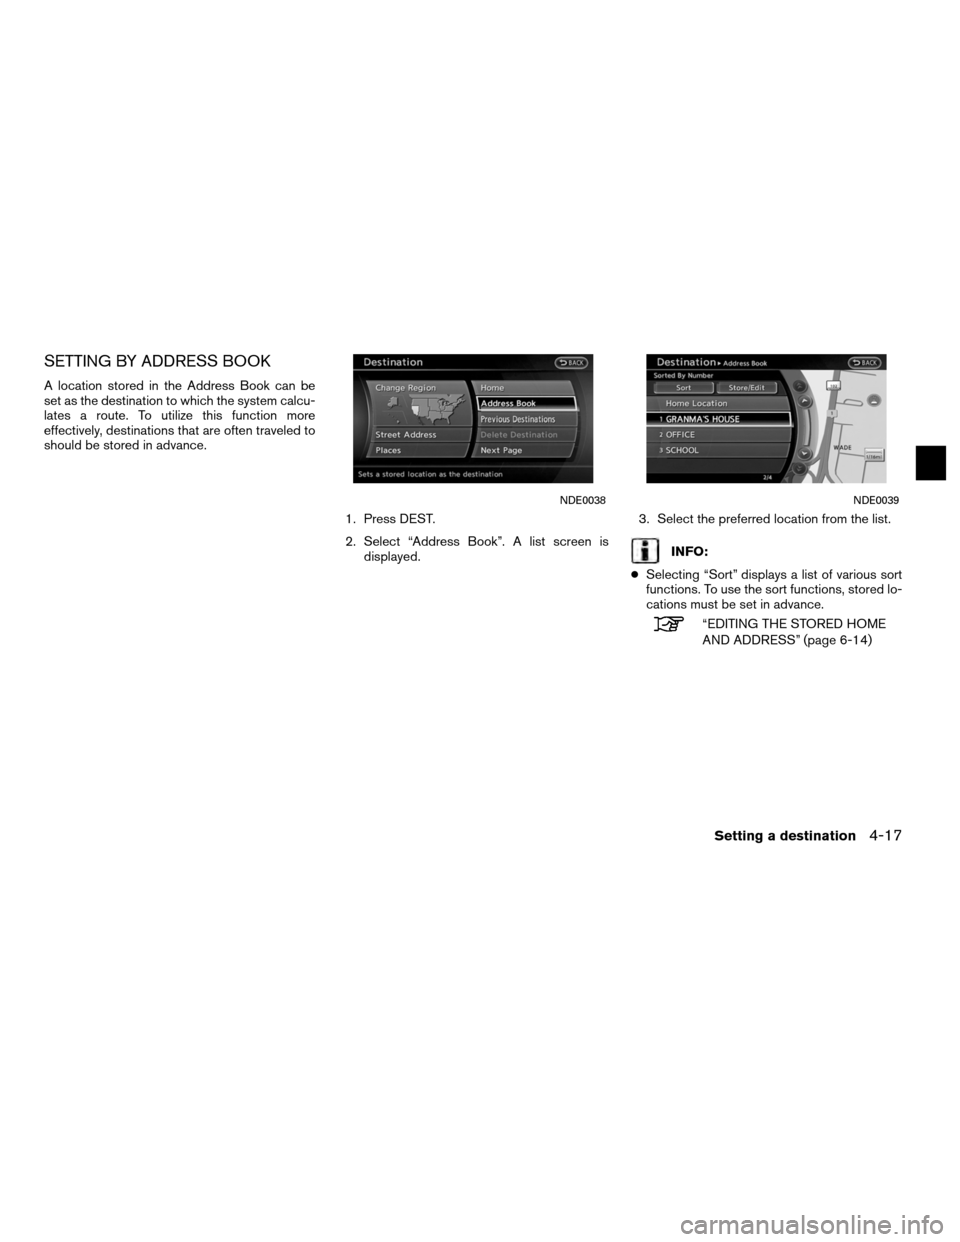 NISSAN ALTIMA COUPE 2012 D32 / 4.G Navigation Manual SETTING BY ADDRESS BOOK
A location stored in the Address Book can be
set as the destination to which the system calcu-
lates a route. To utilize this function more
effectively, destinations that are o